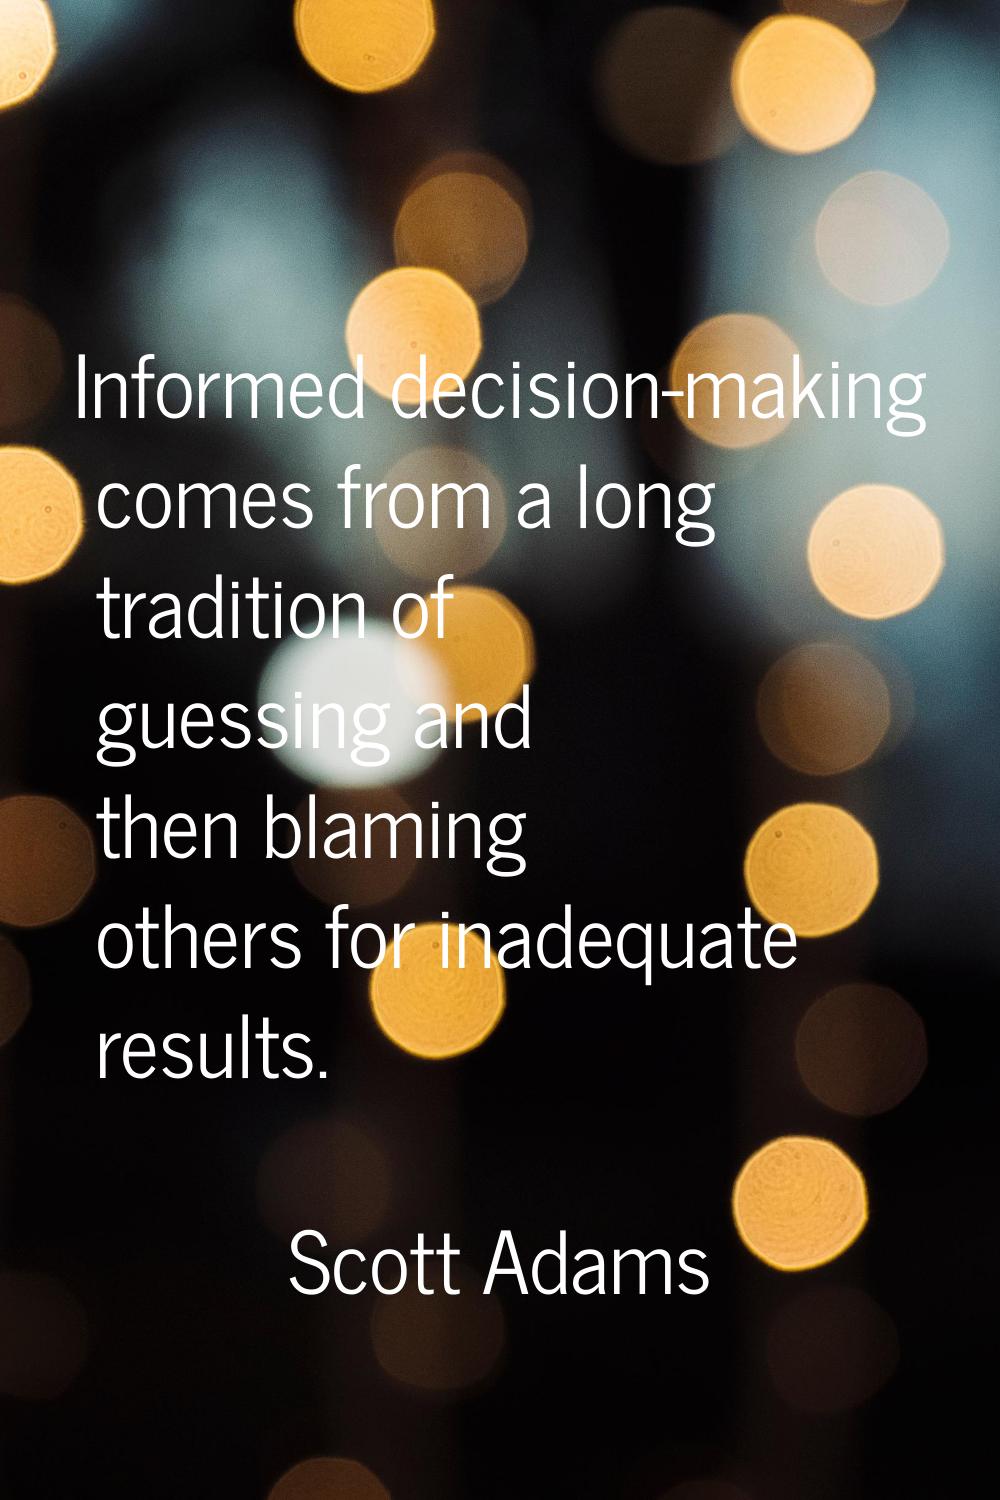 Informed decision-making comes from a long tradition of guessing and then blaming others for inadeq